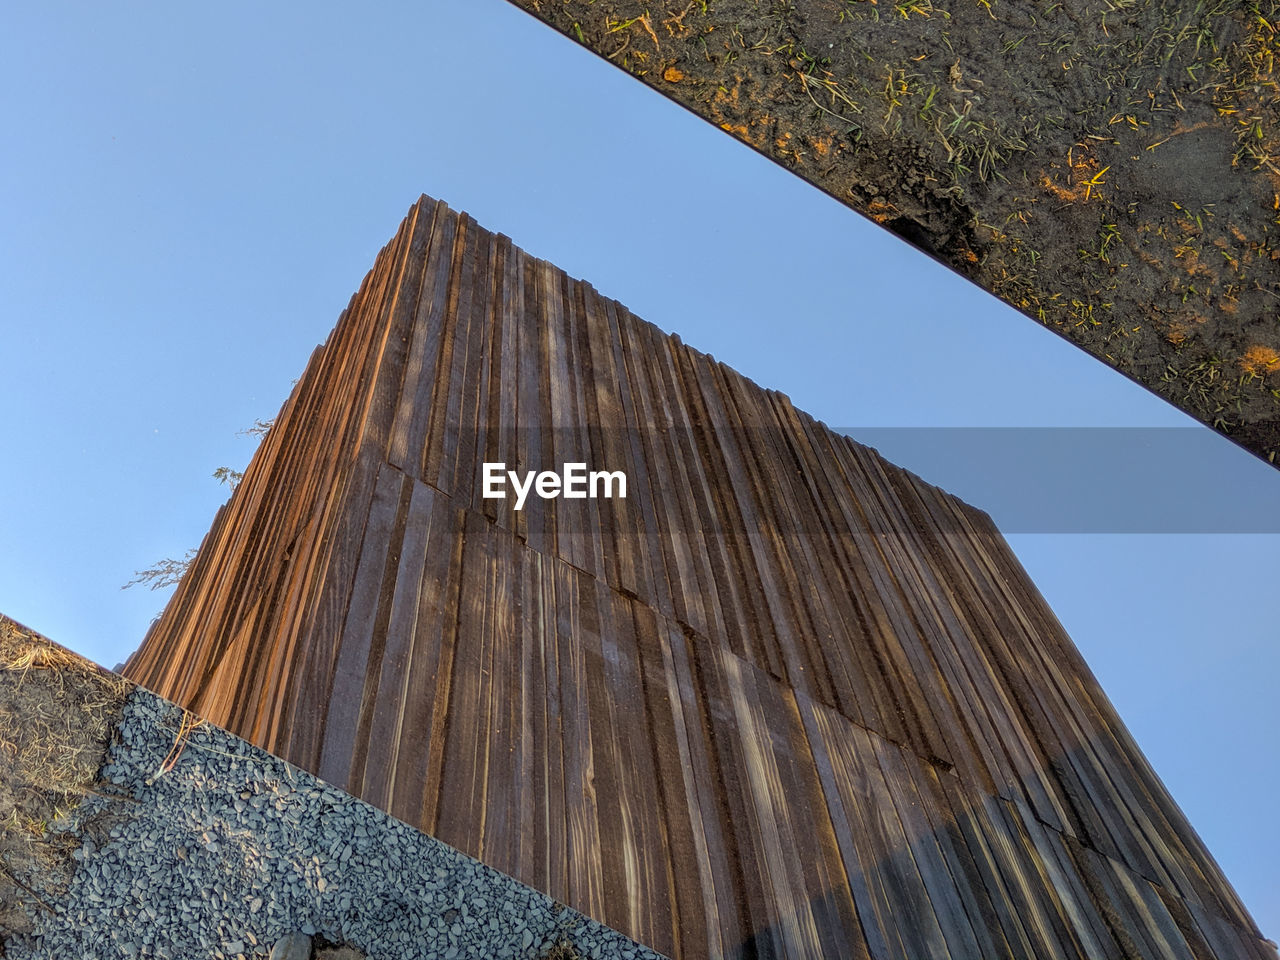 Wooden structure seen against blue sky in a mirror on the ground